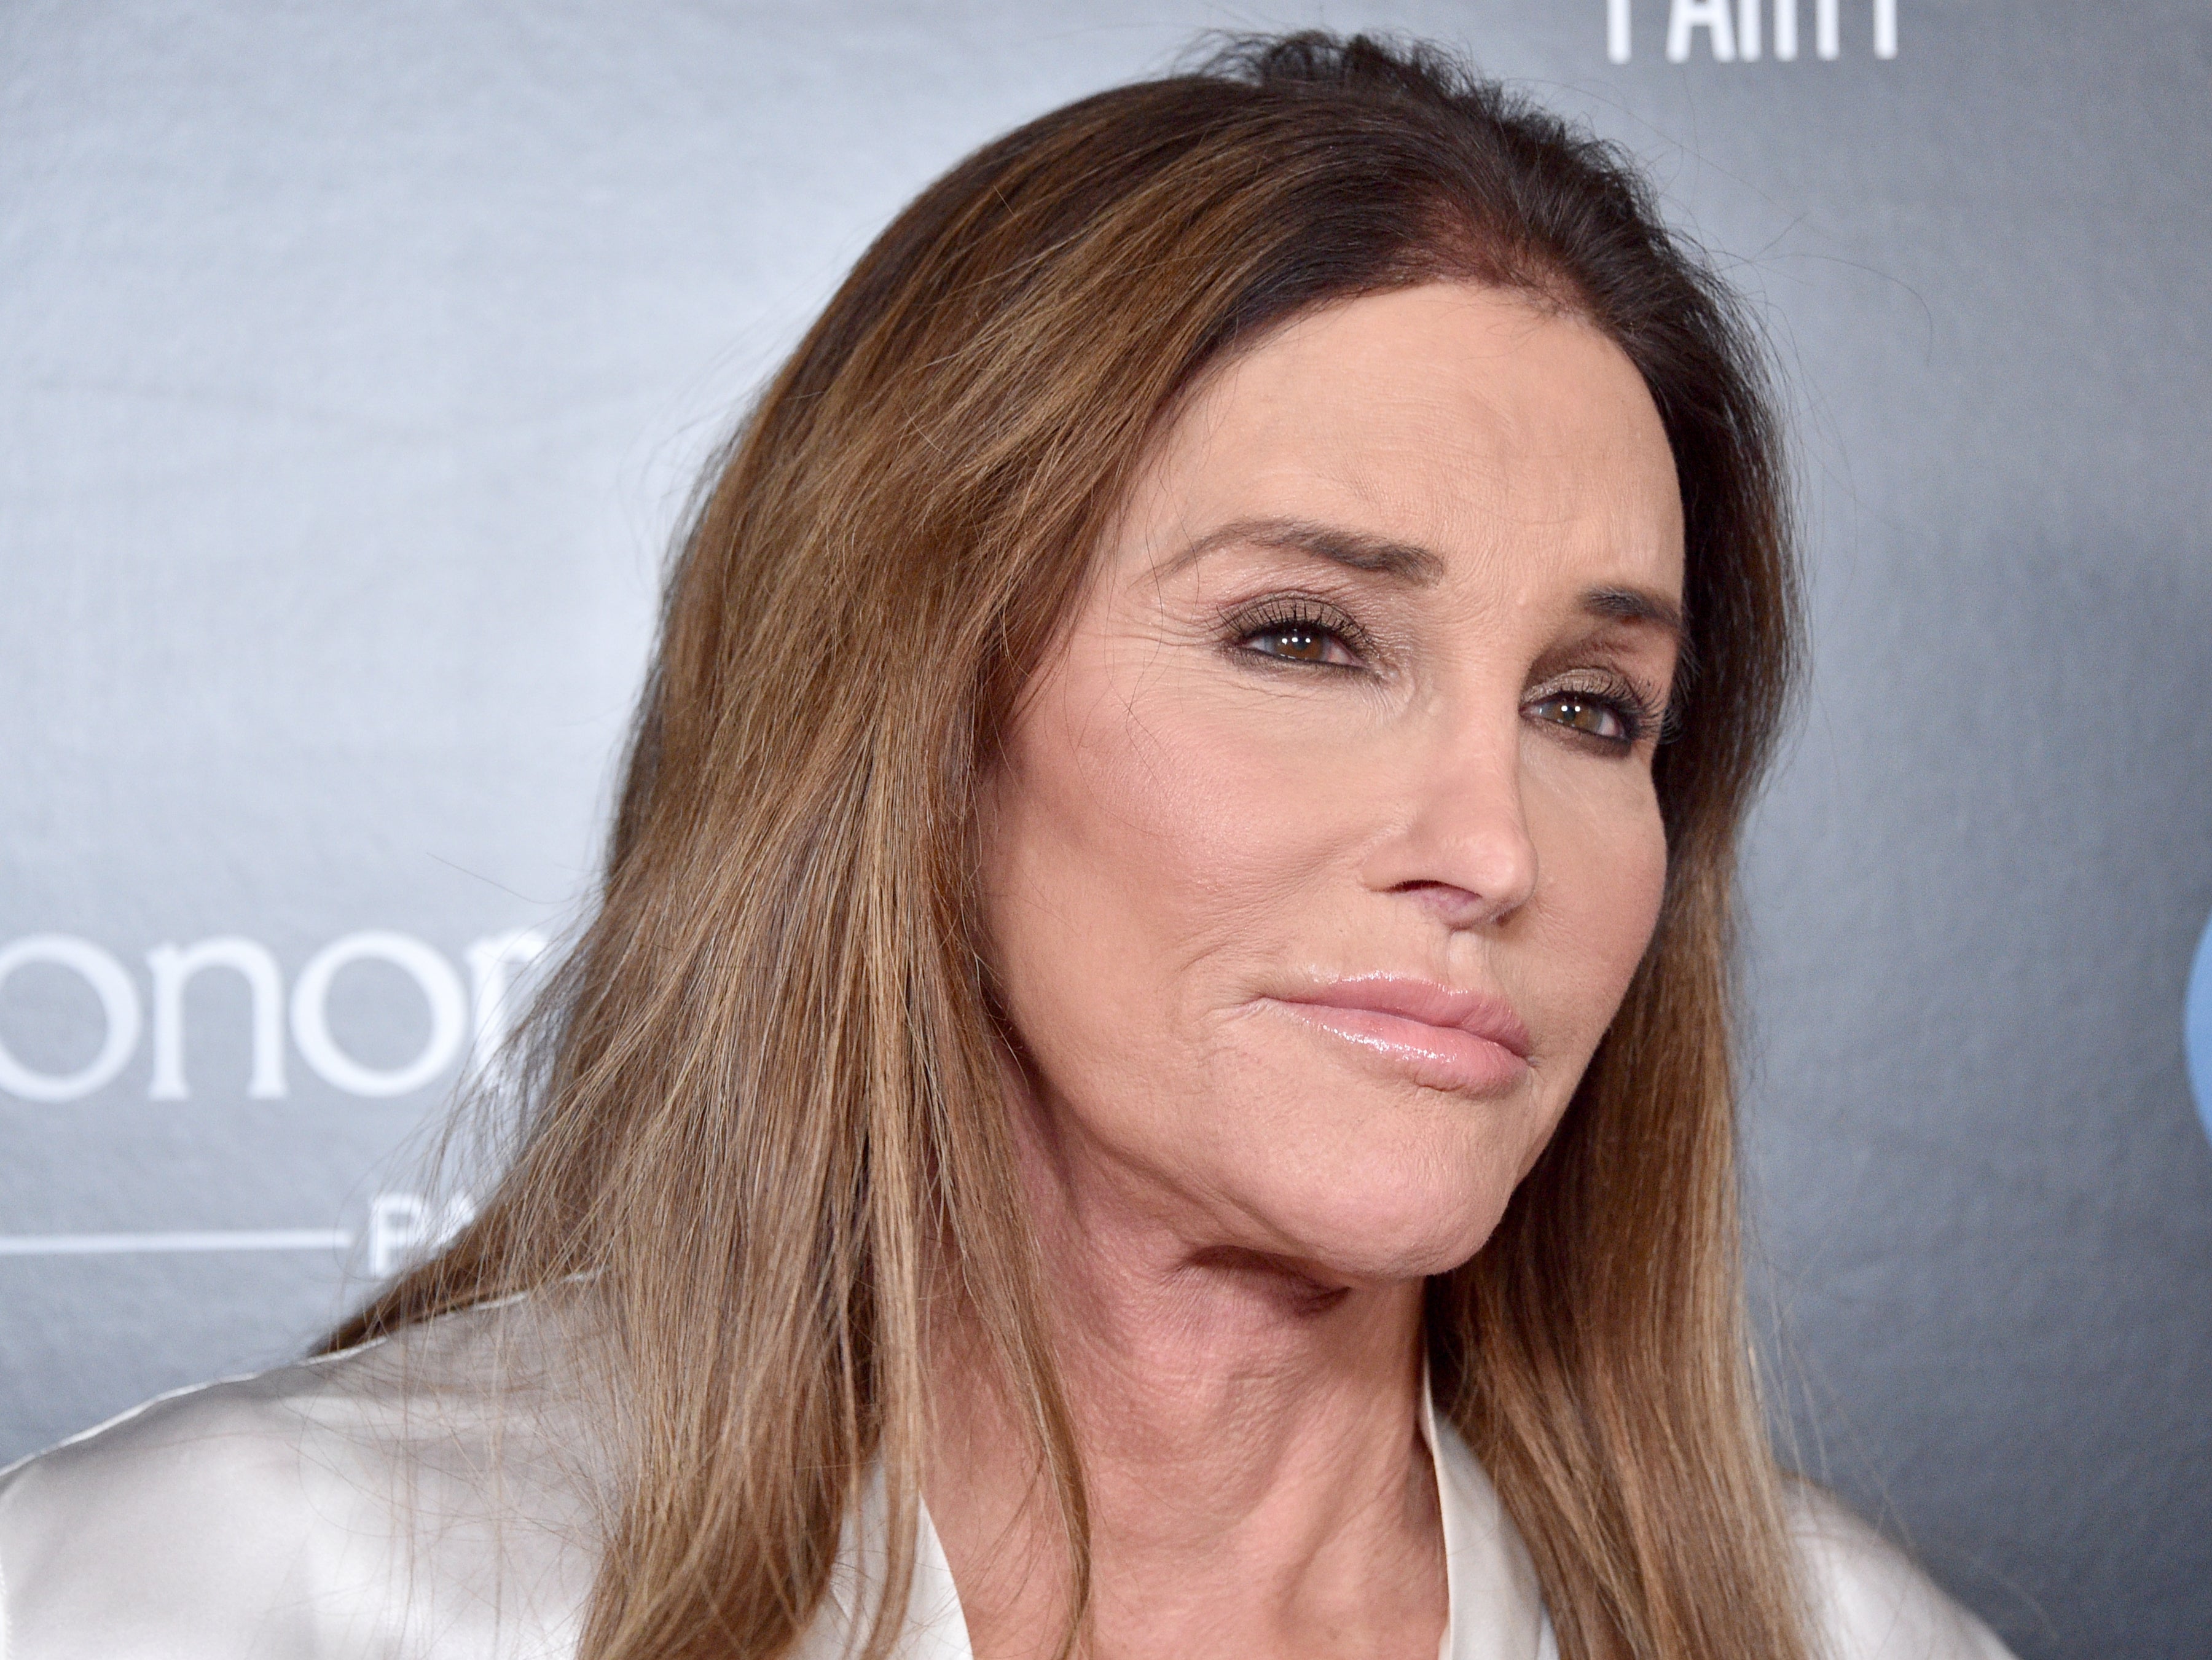 Caitlyn Jenner says she would support Donald Trump if he runs for US